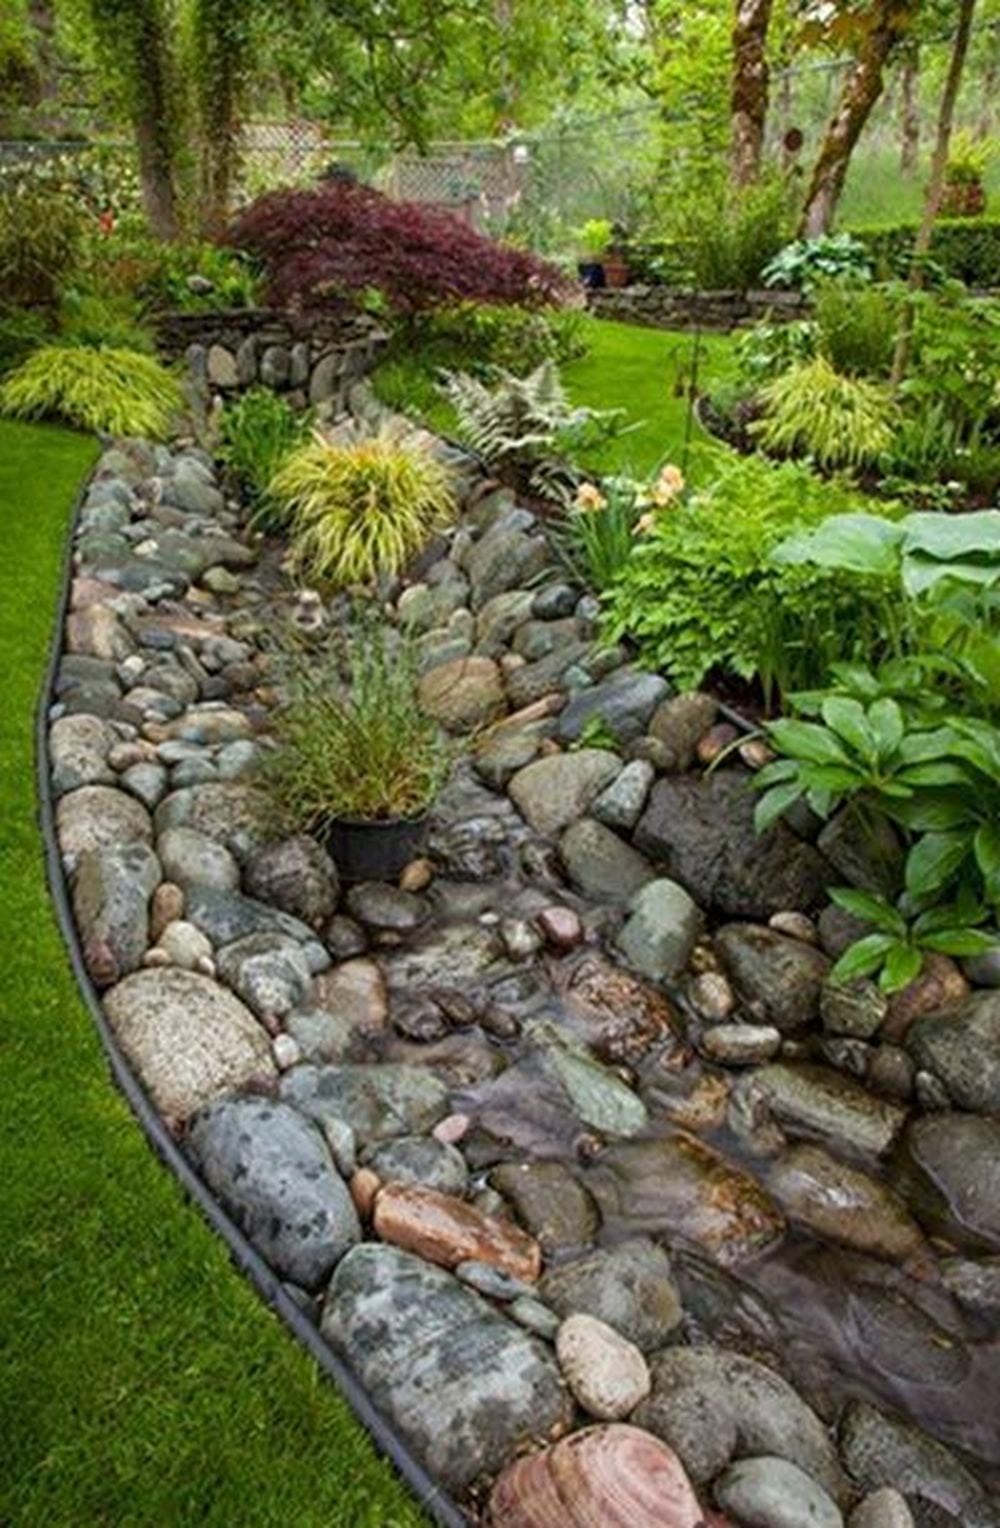 How to Install a Dry Creek Bed – DIY projects for everyone!